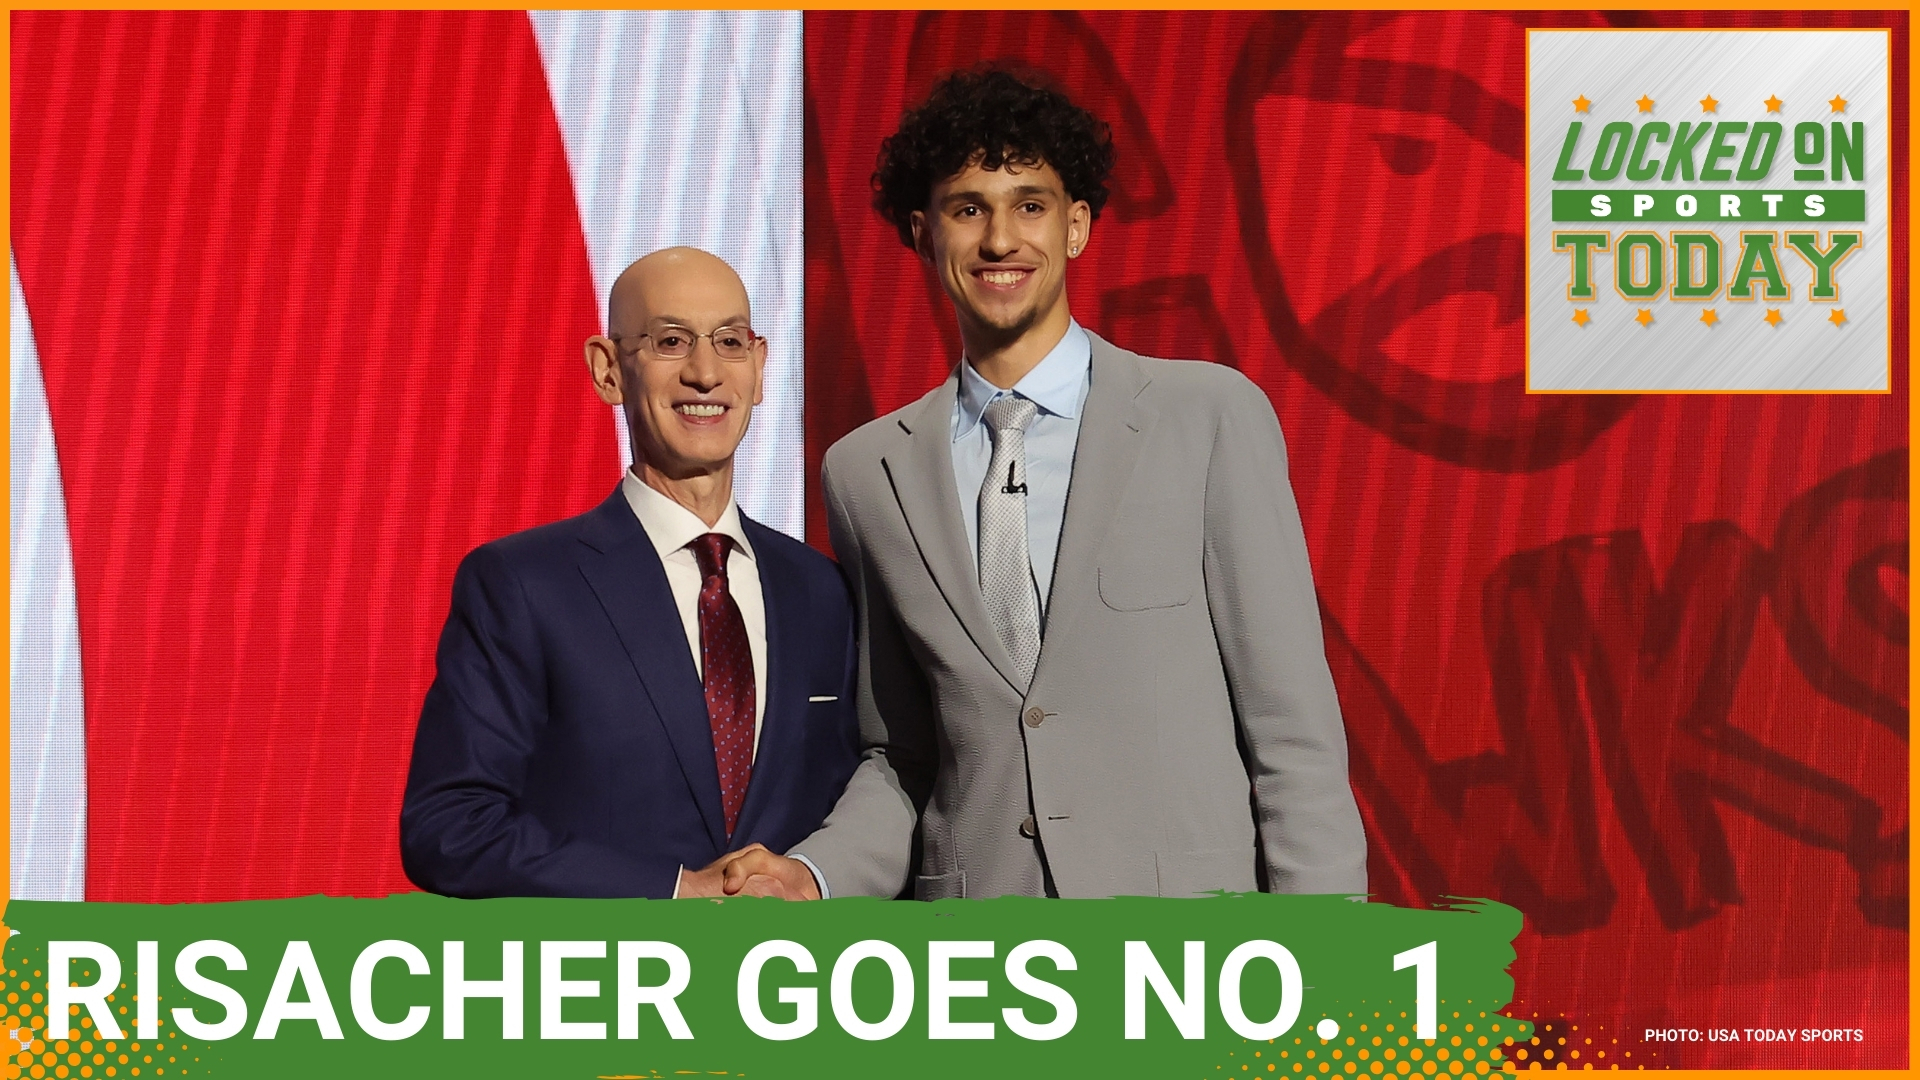 Croissants … fine wine … hoops? For the second year in a row, the number one overall pick in the NBA Draft is a player from France.